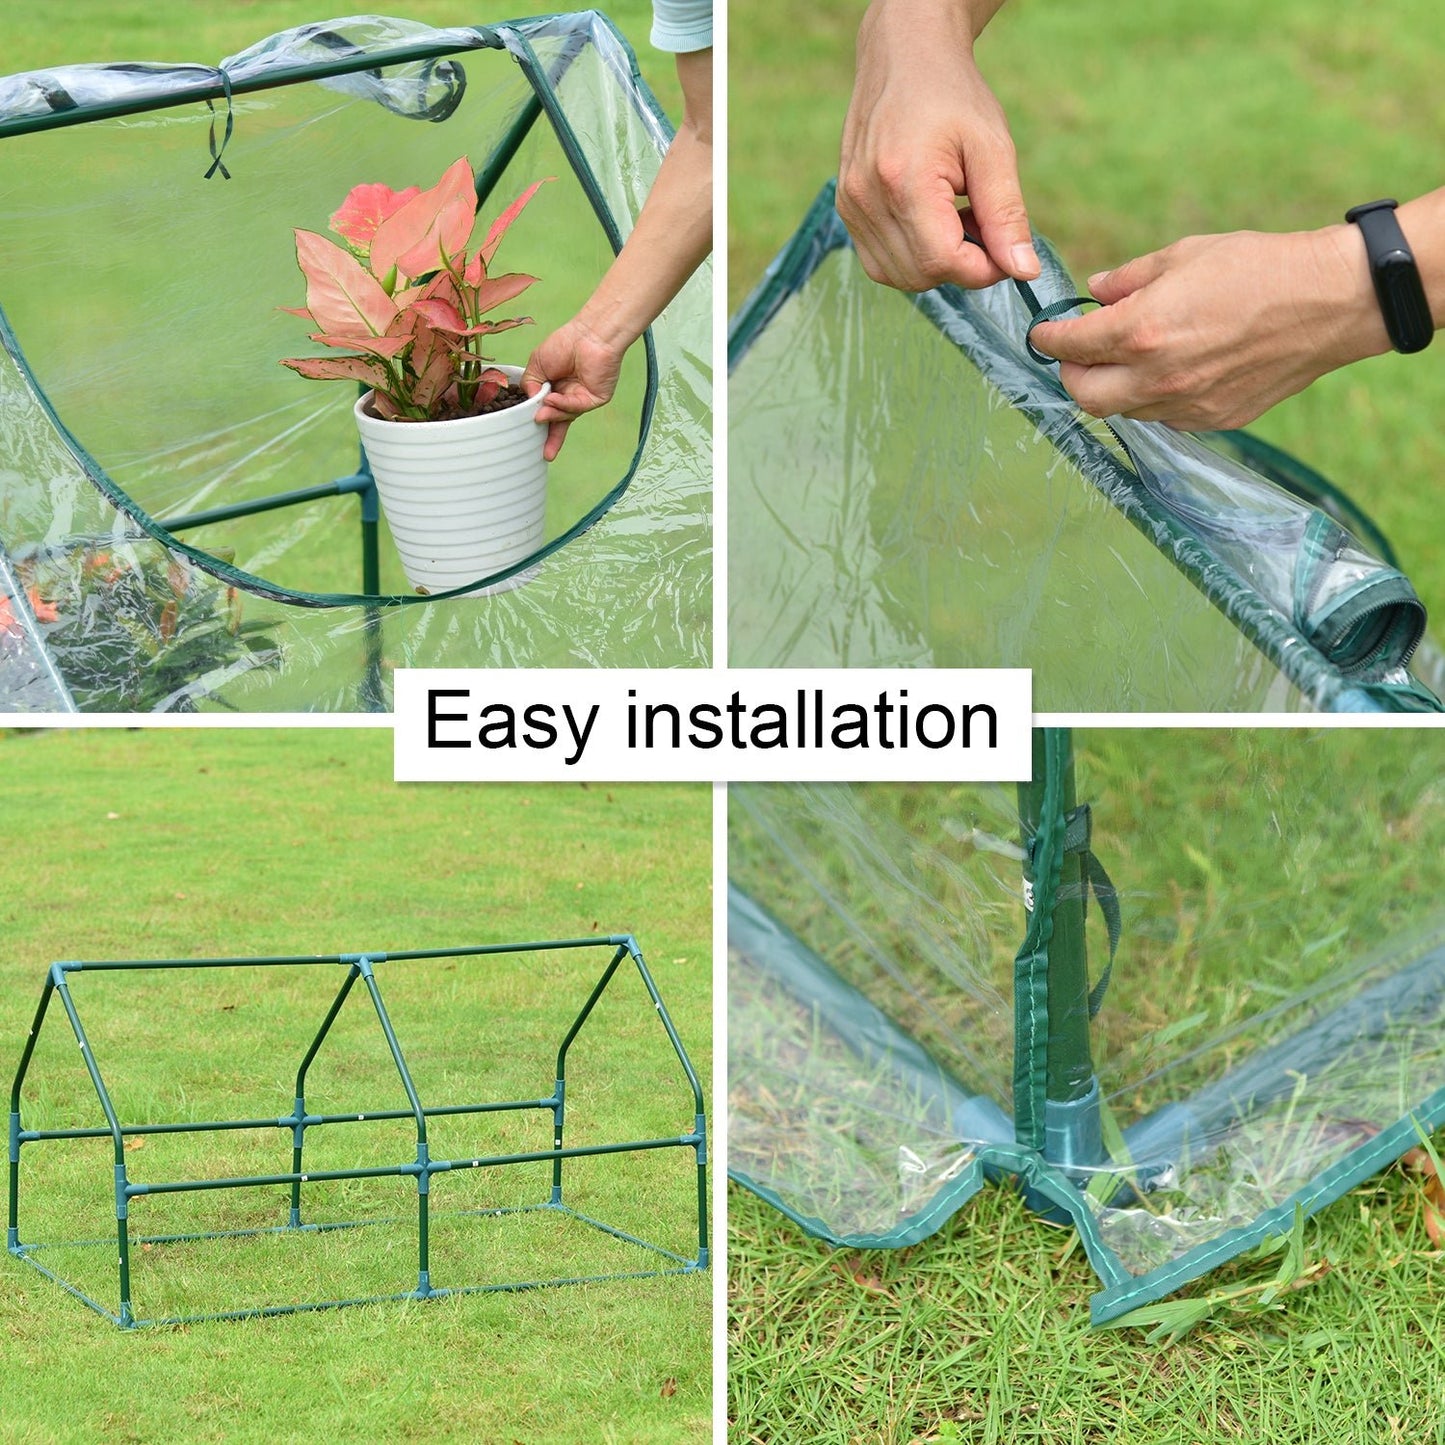 4 ft. x 2 ft. x 2 ft. Mini Greenhouse with Zipper Doors, Water Resistant & UV Protected Greenhouse Aoodor   